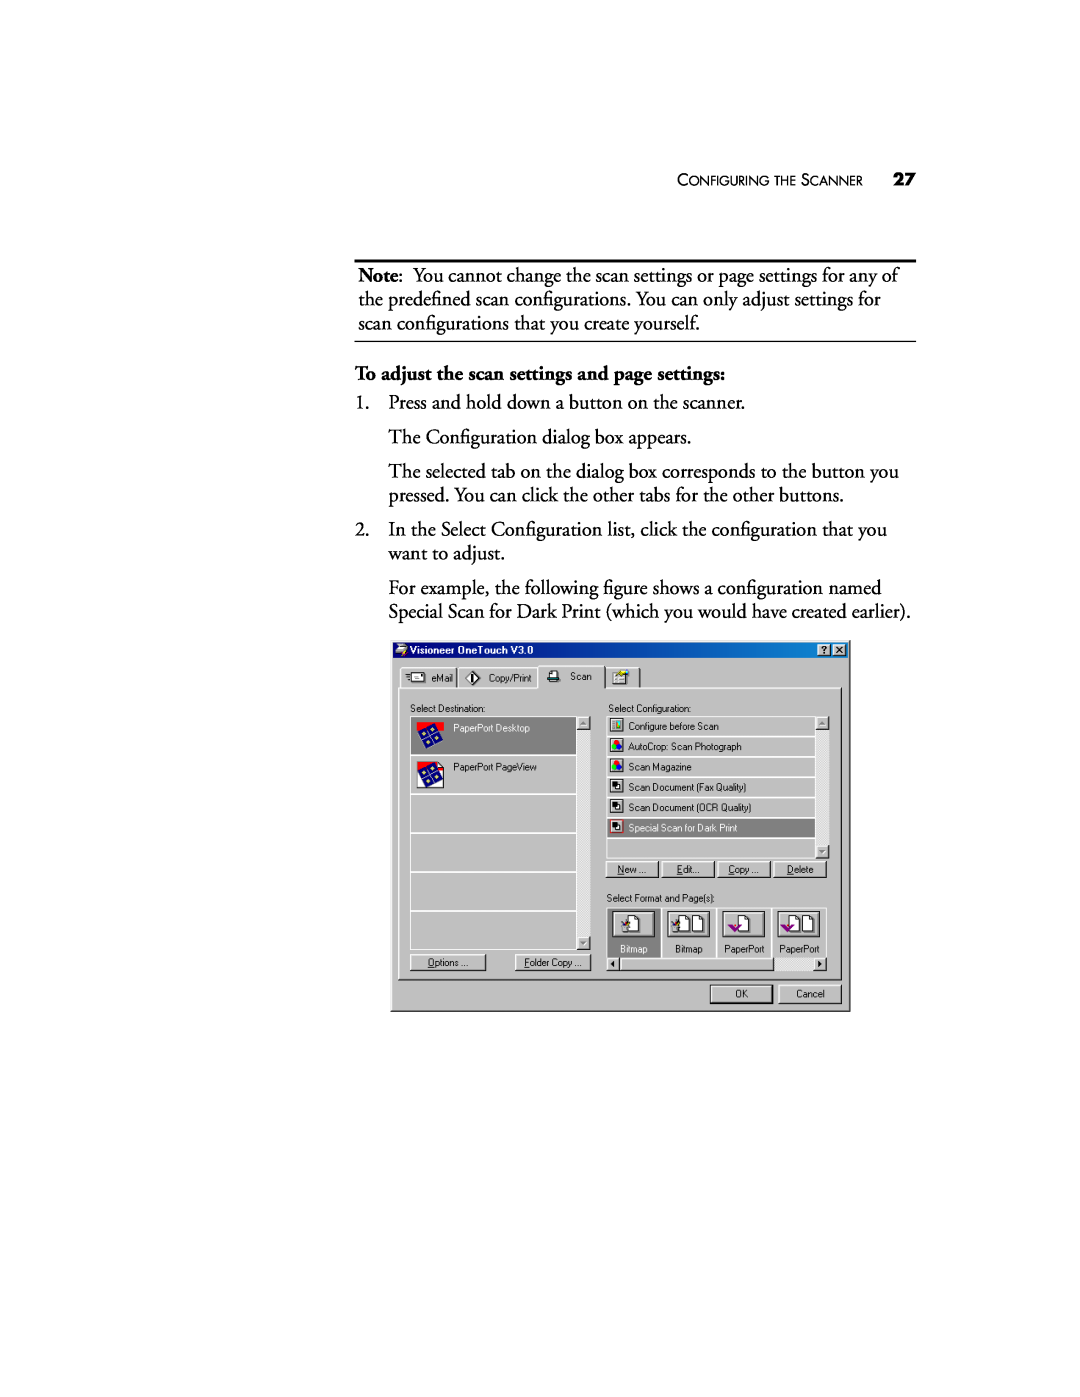 Visioneer 5820 manual To adjust the scan settings and page settings 